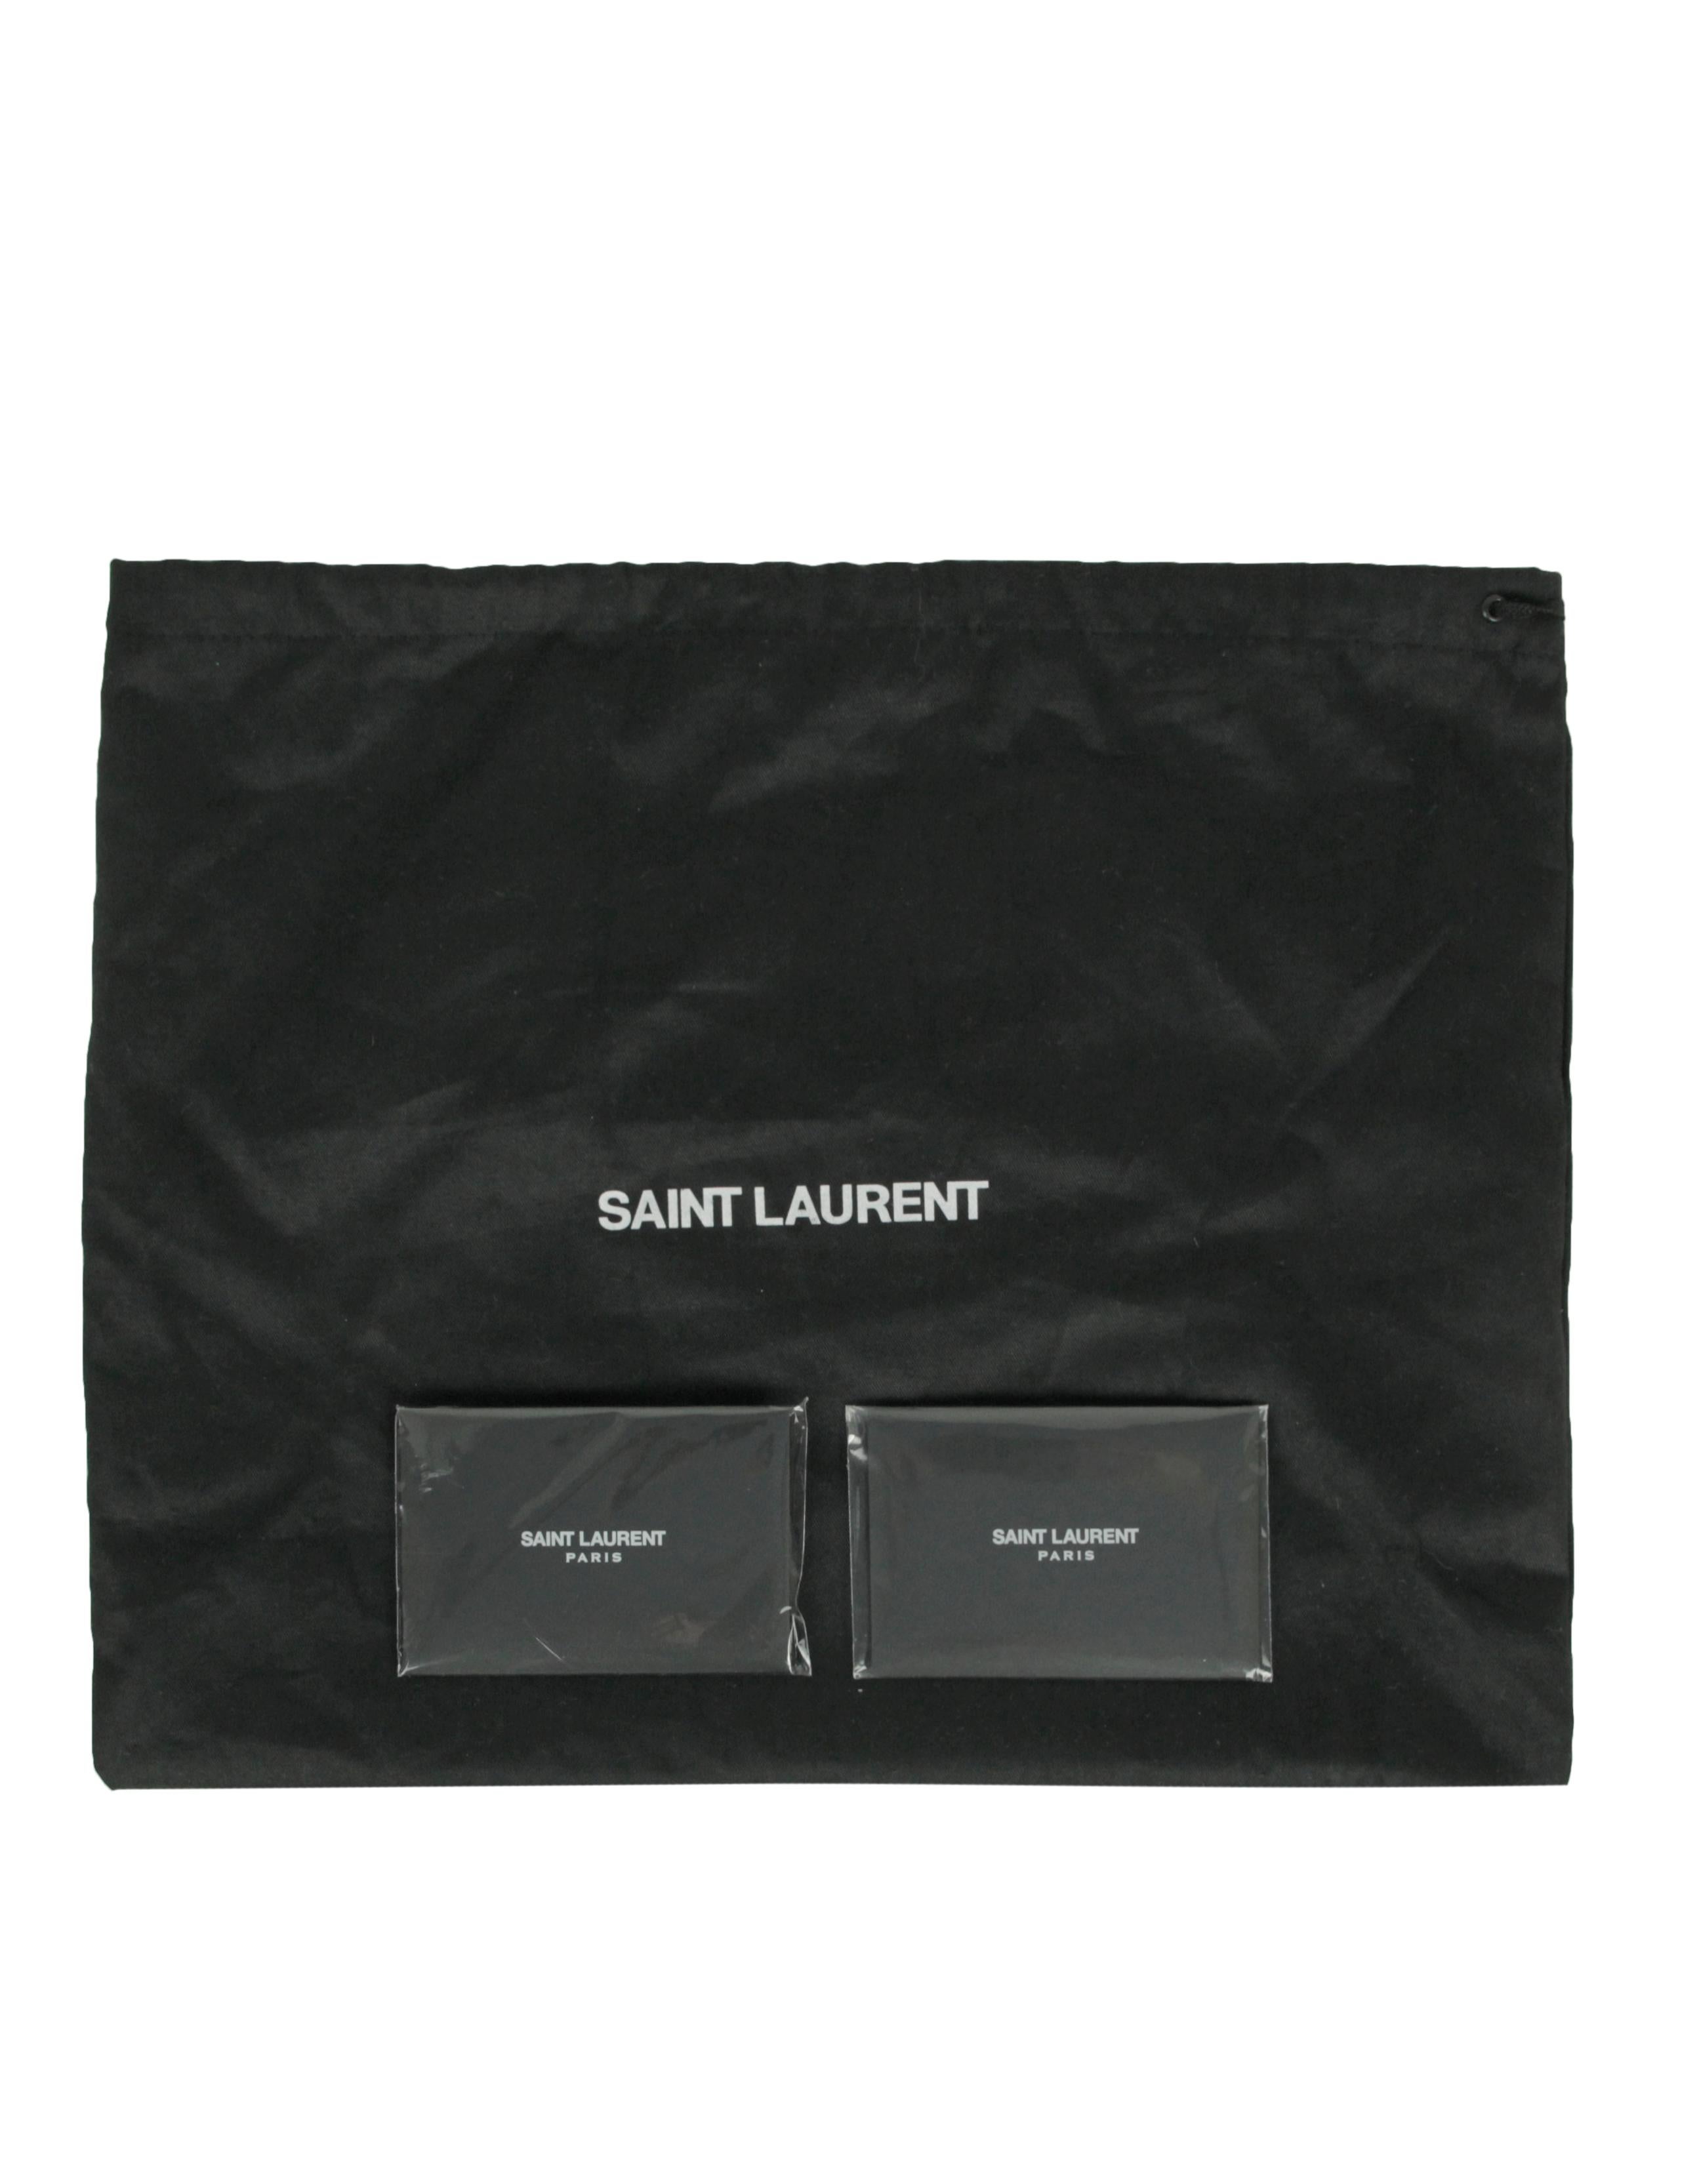 Saint Laurent Burgundy Leather Small Loulou Puffer Bag 4